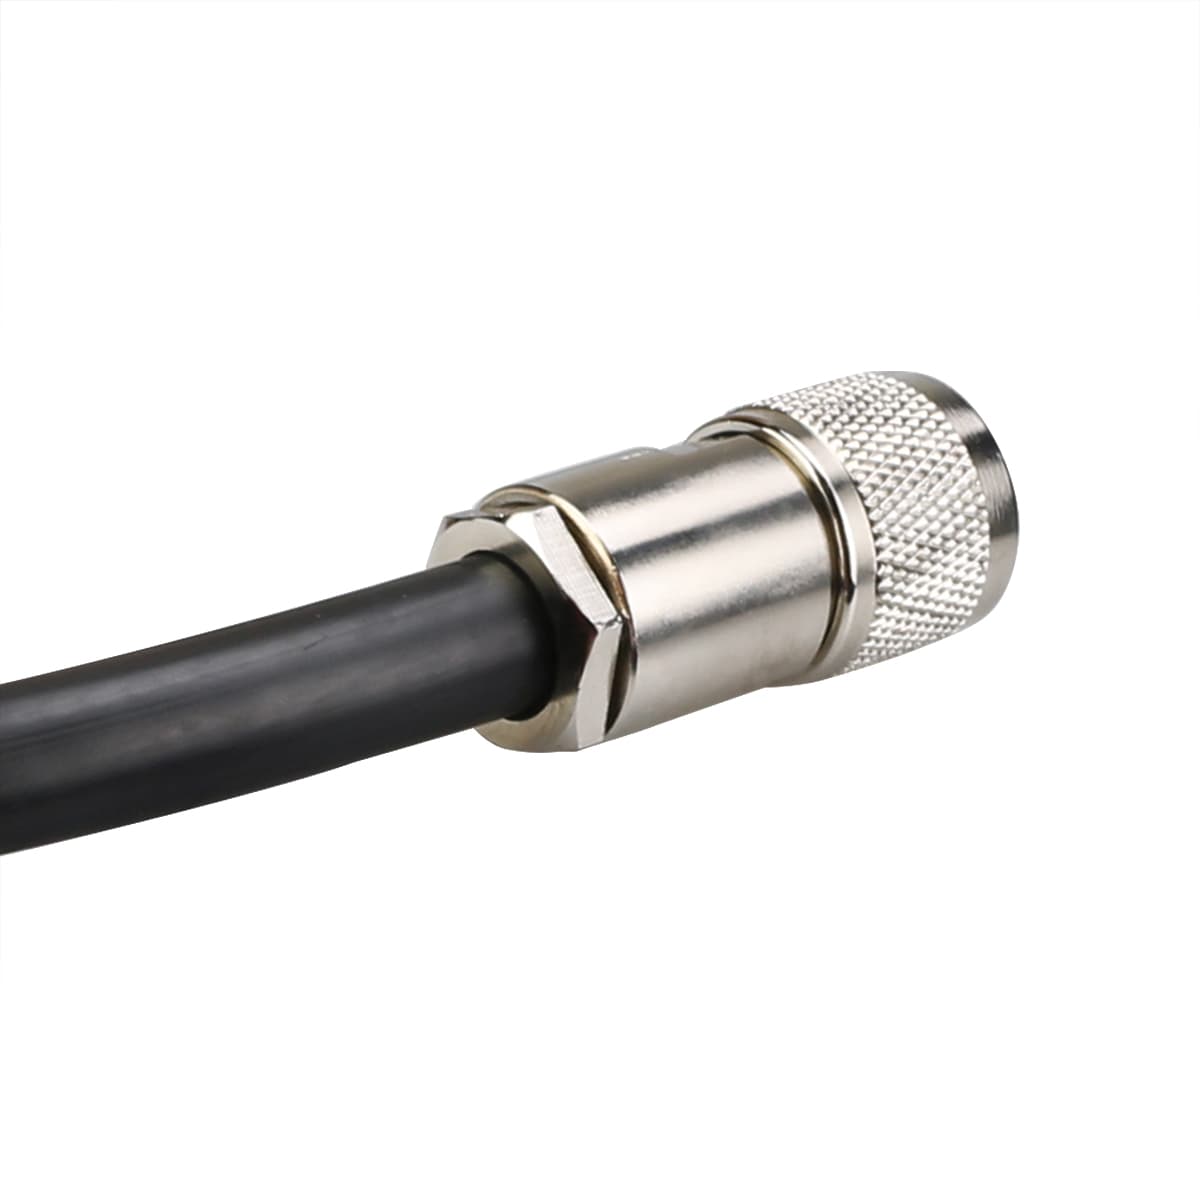 25 Meter Coaxial Cable for Mobile Radio